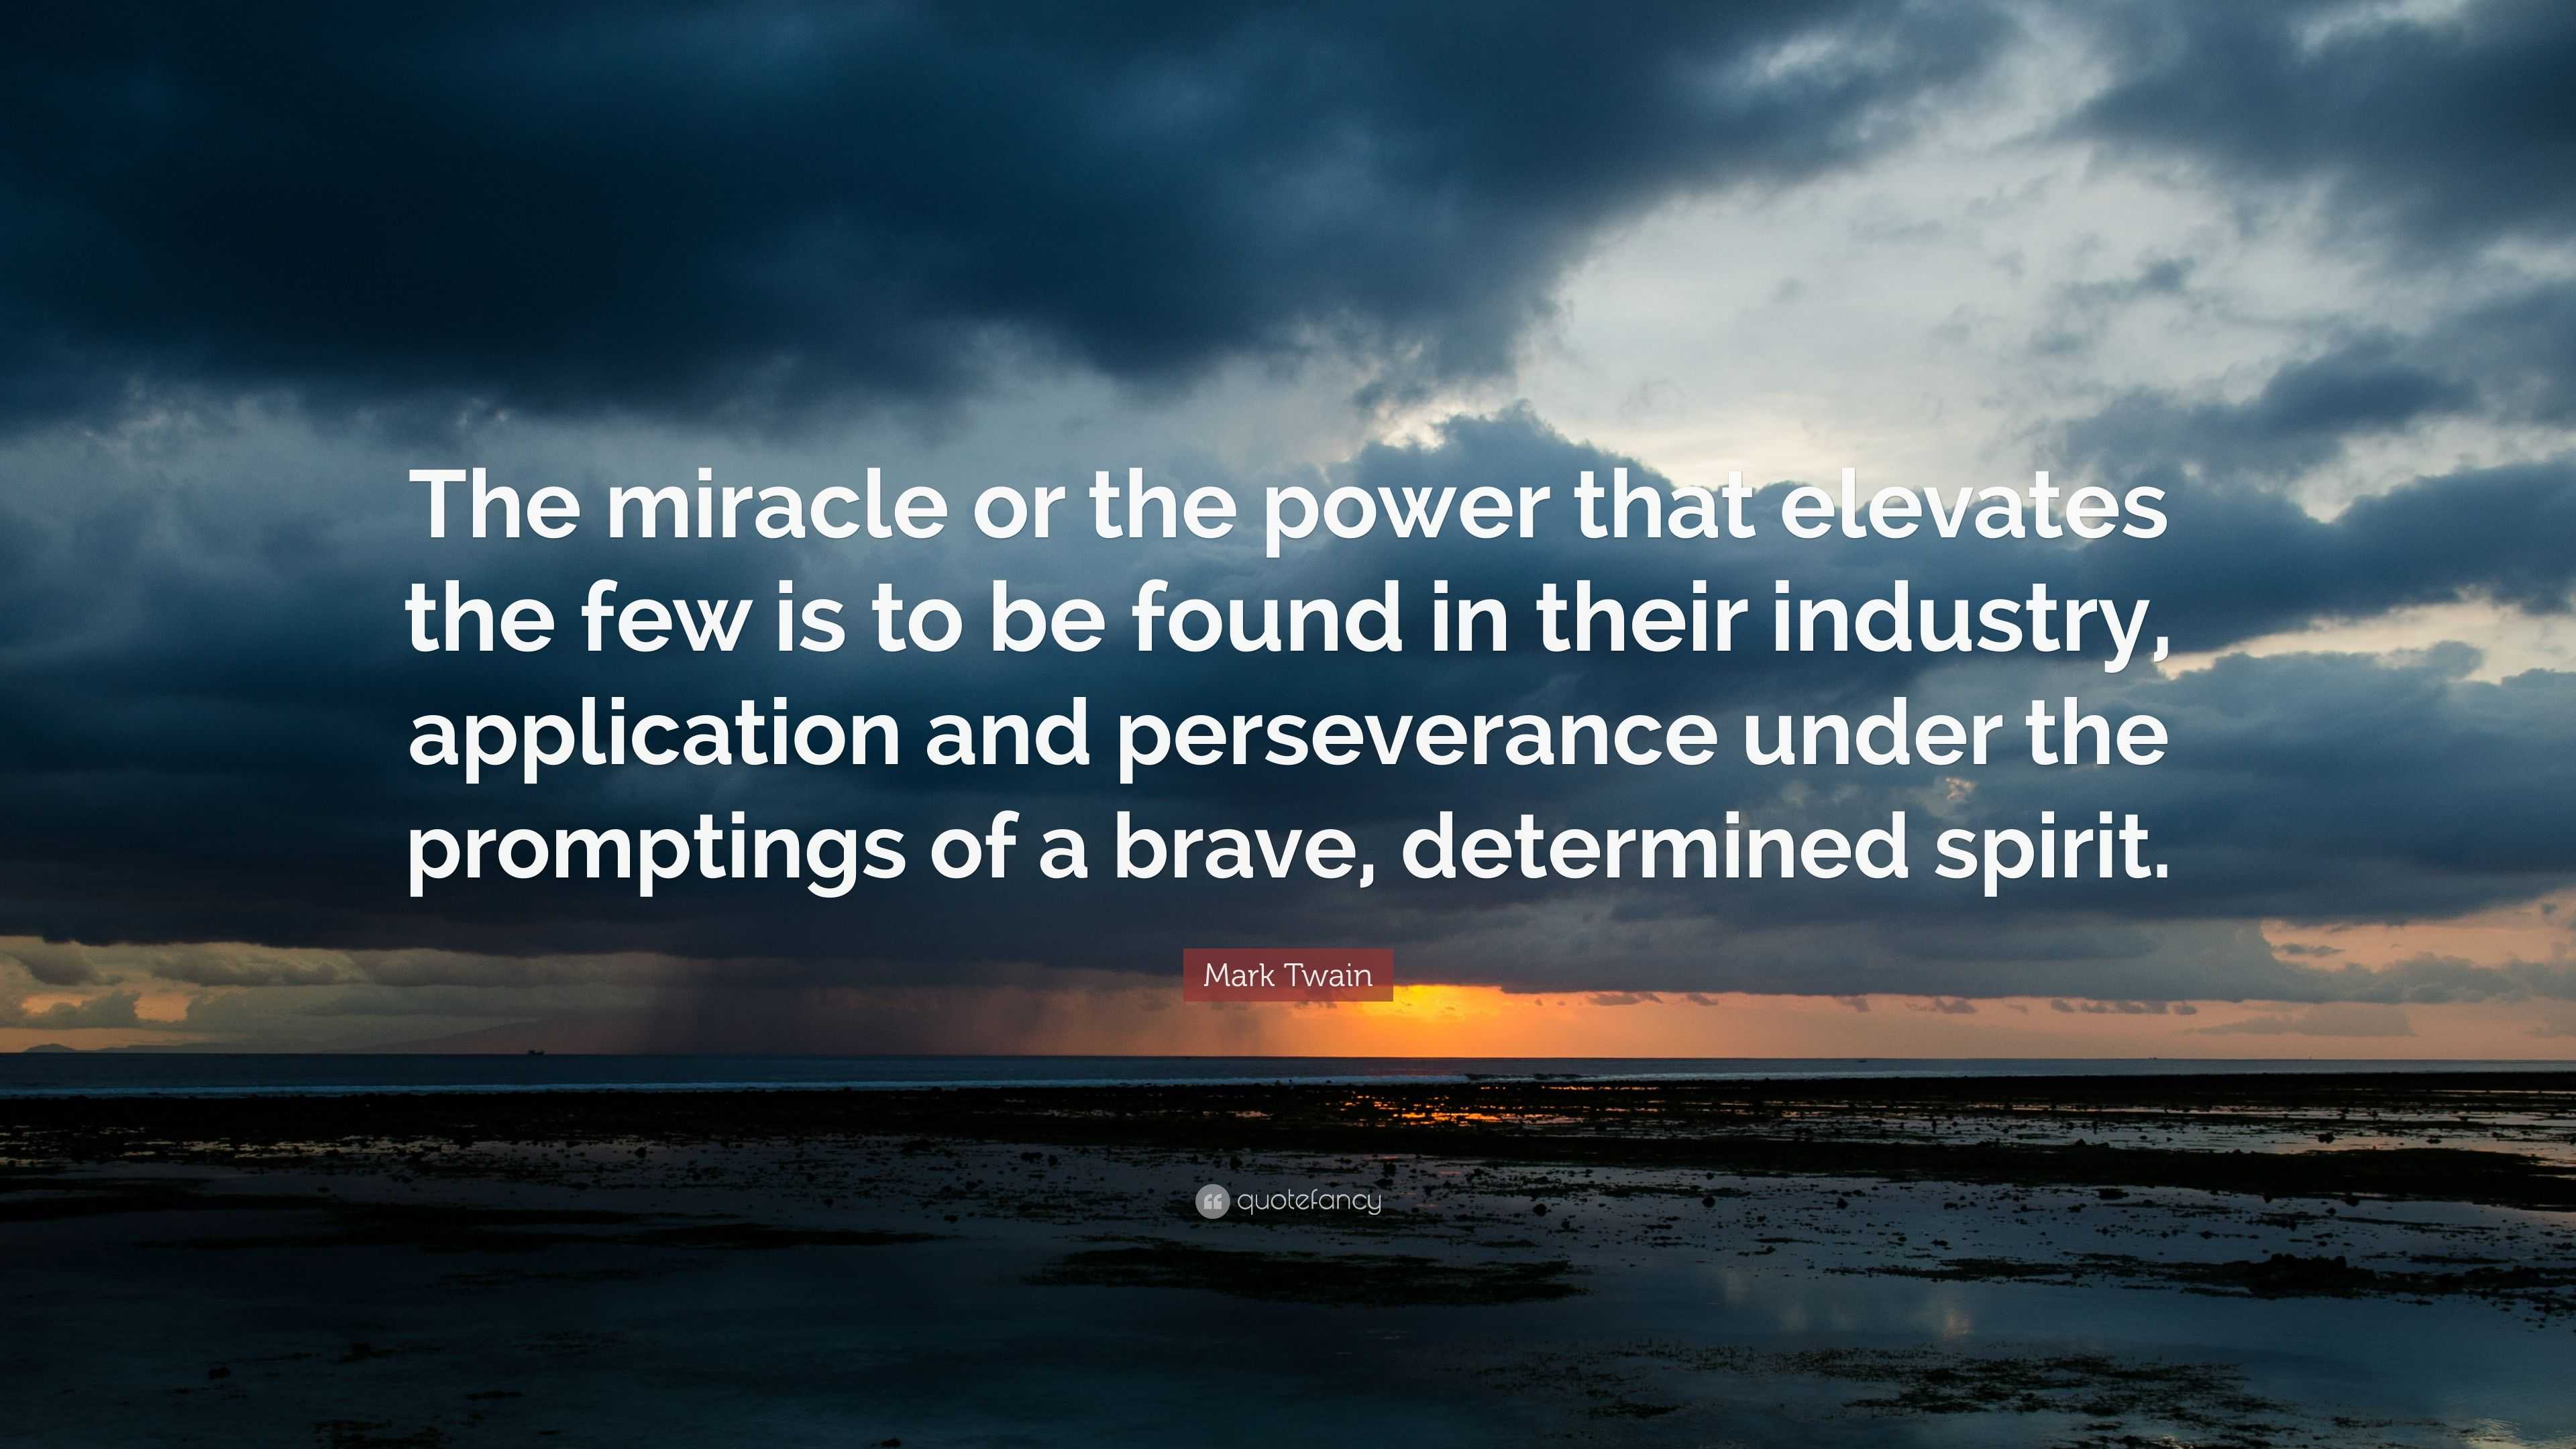 Mark Twain Quote: “The miracle or the power that elevates the few is to ...